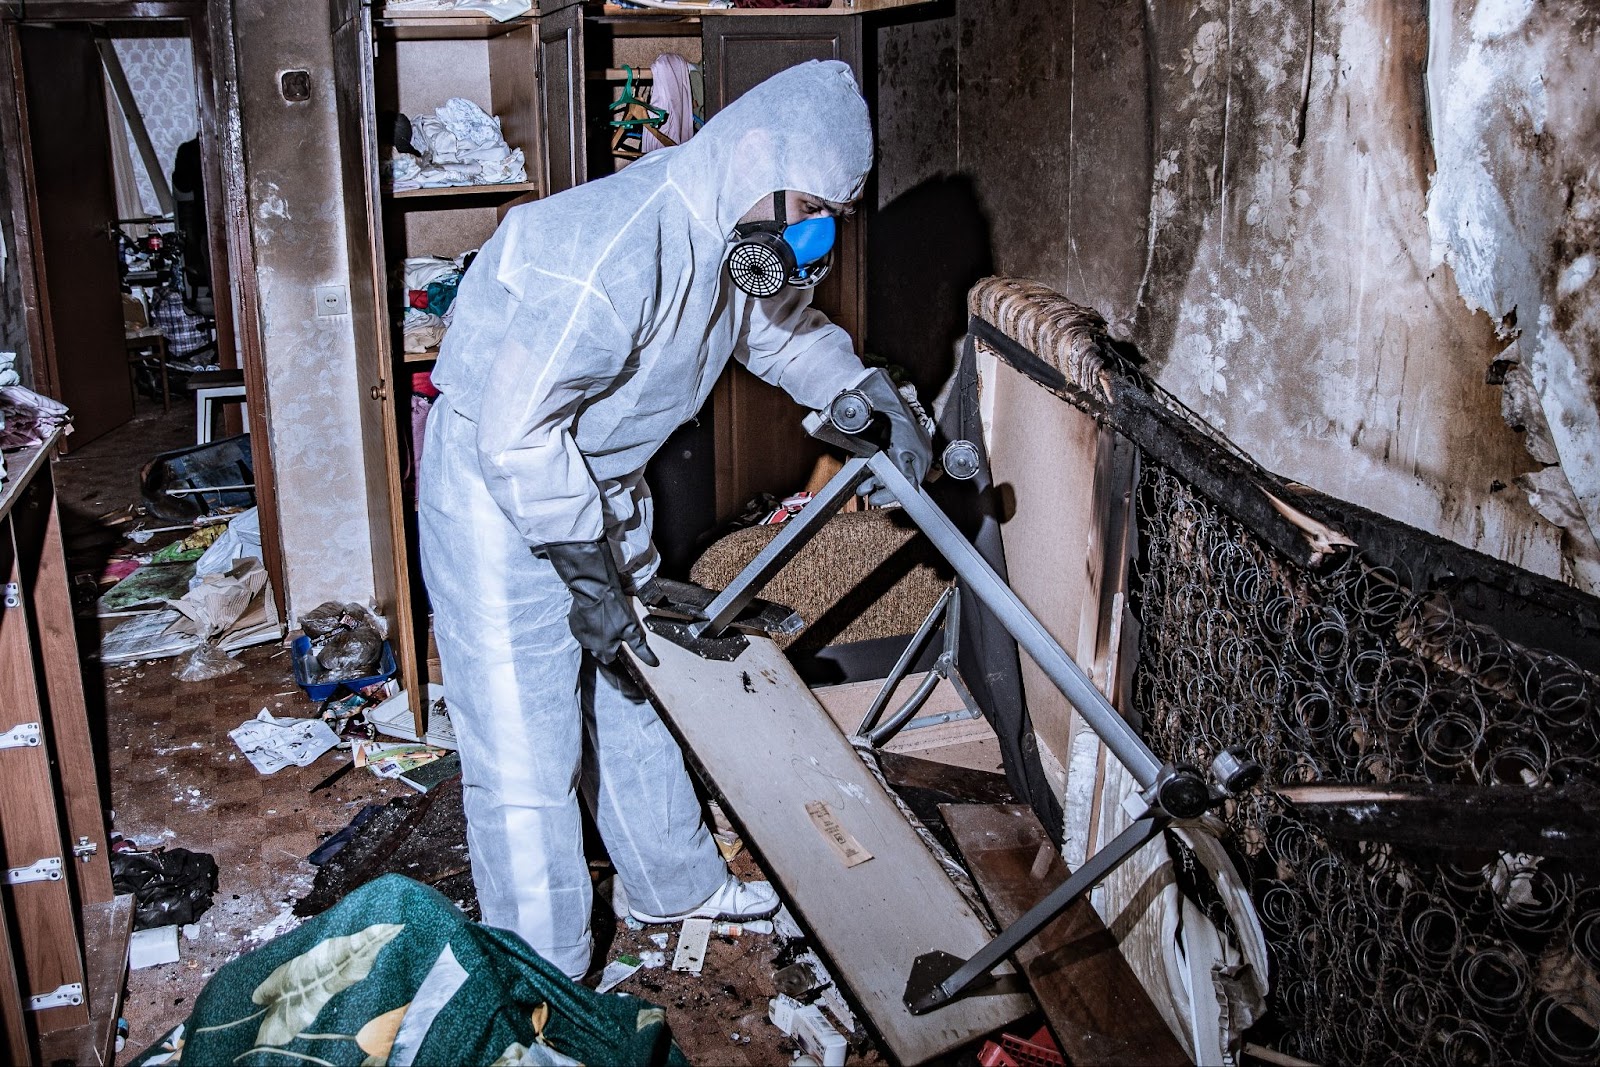 A person in a white protective suit cleans a room after a house fire, restoring it from fire damage